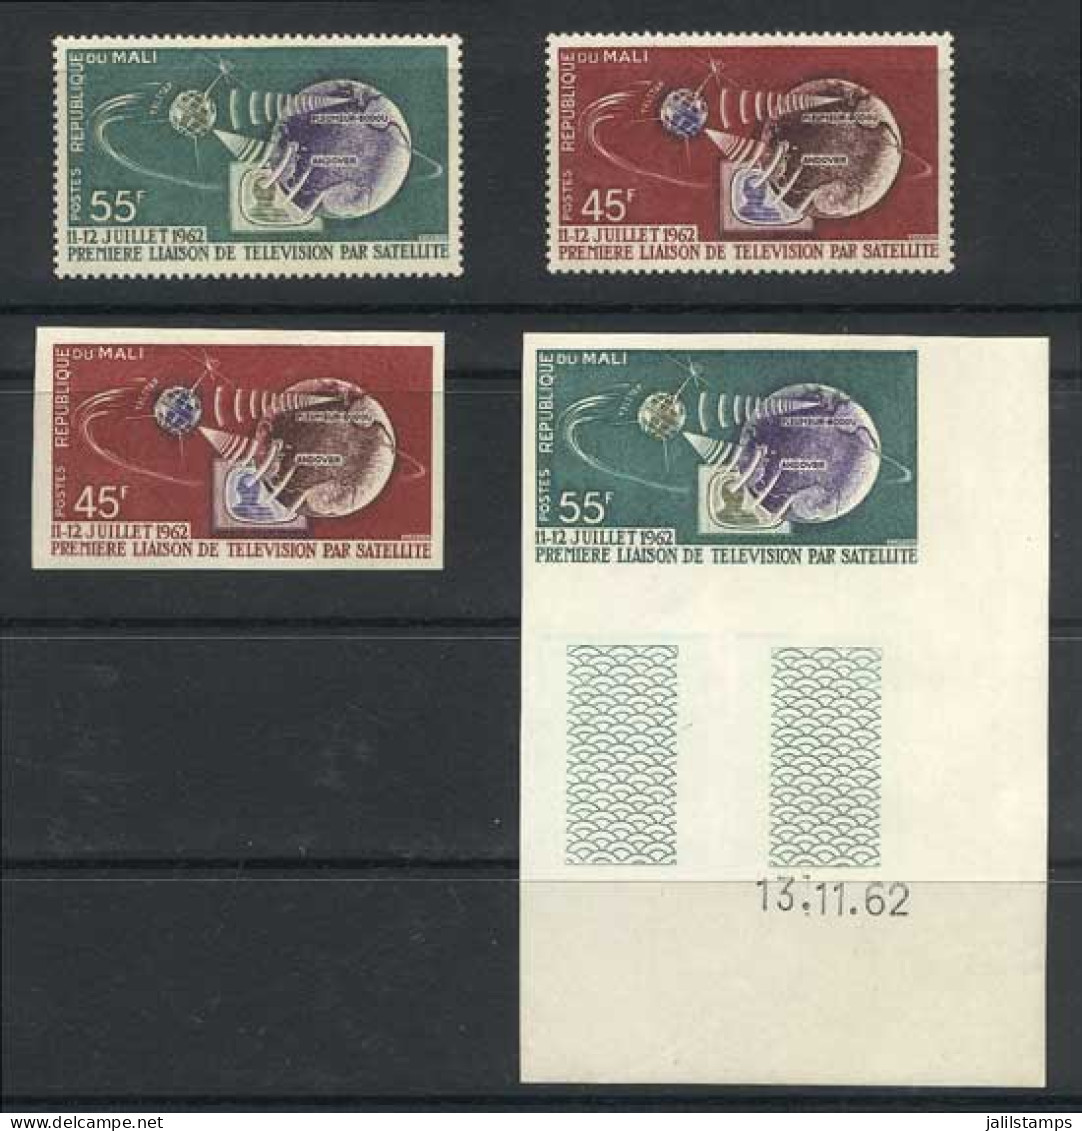 MALI: Yvert 41/42, 1962 First Satellite Television Transmission, Set Of 2 Values Perforated And IMPERFORATE, VF Quality! - Malí (1959-...)